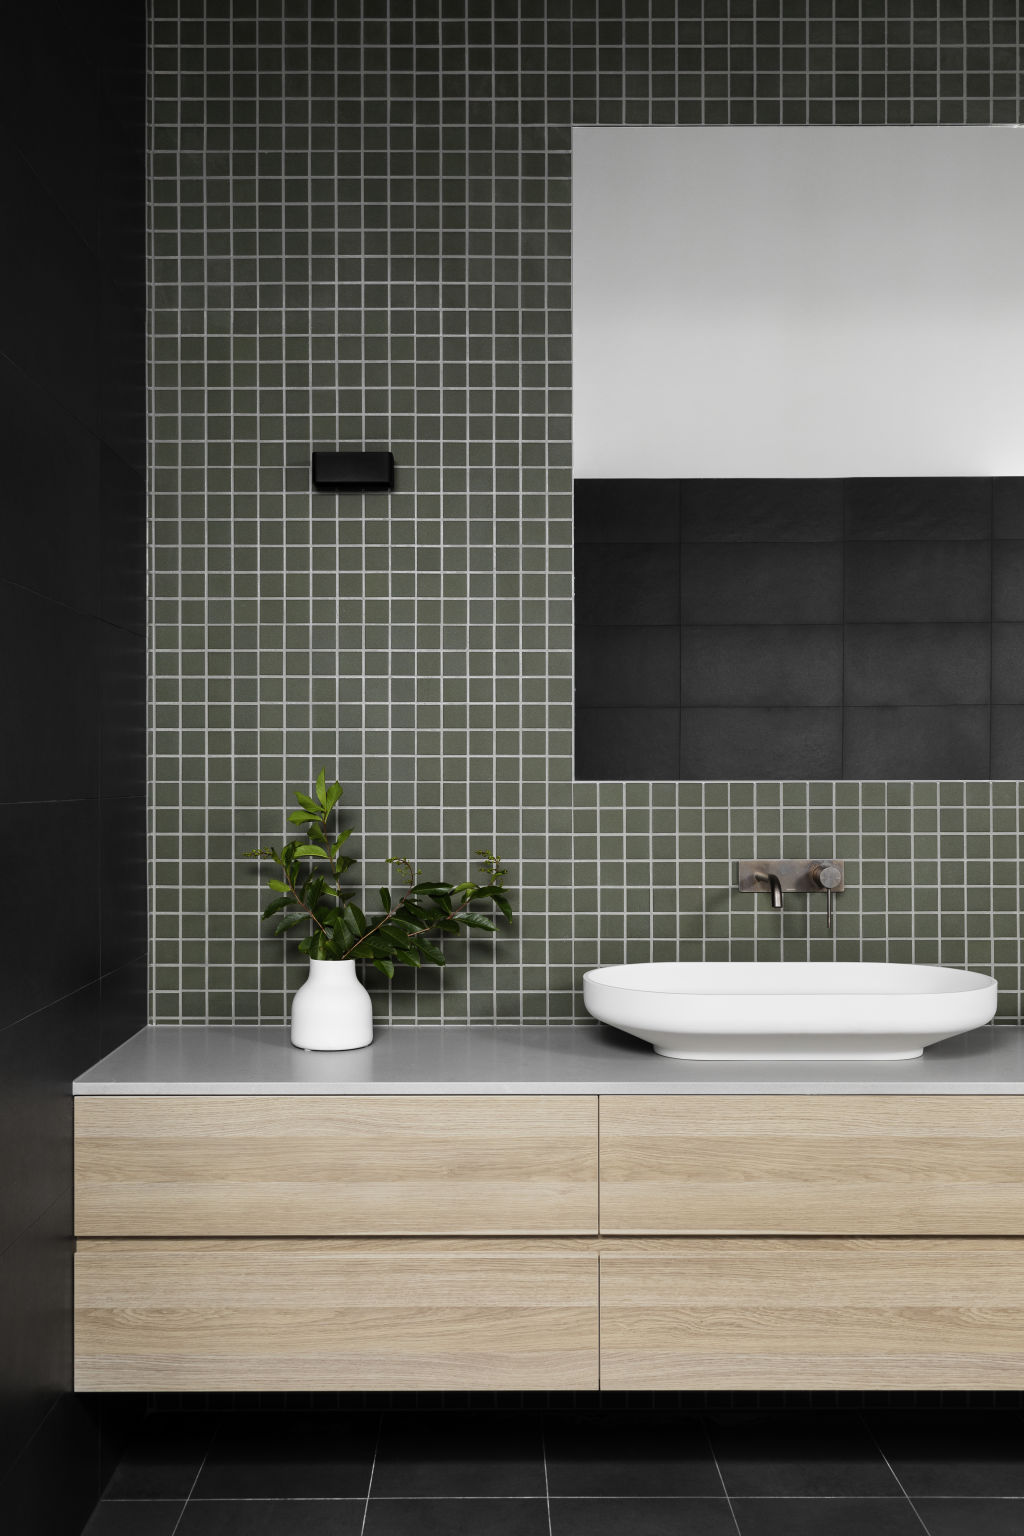 Deep green will continue to trend in feature tiles. Urban Barn house by Heartly interior design studio. Photo: Martina Gemmola